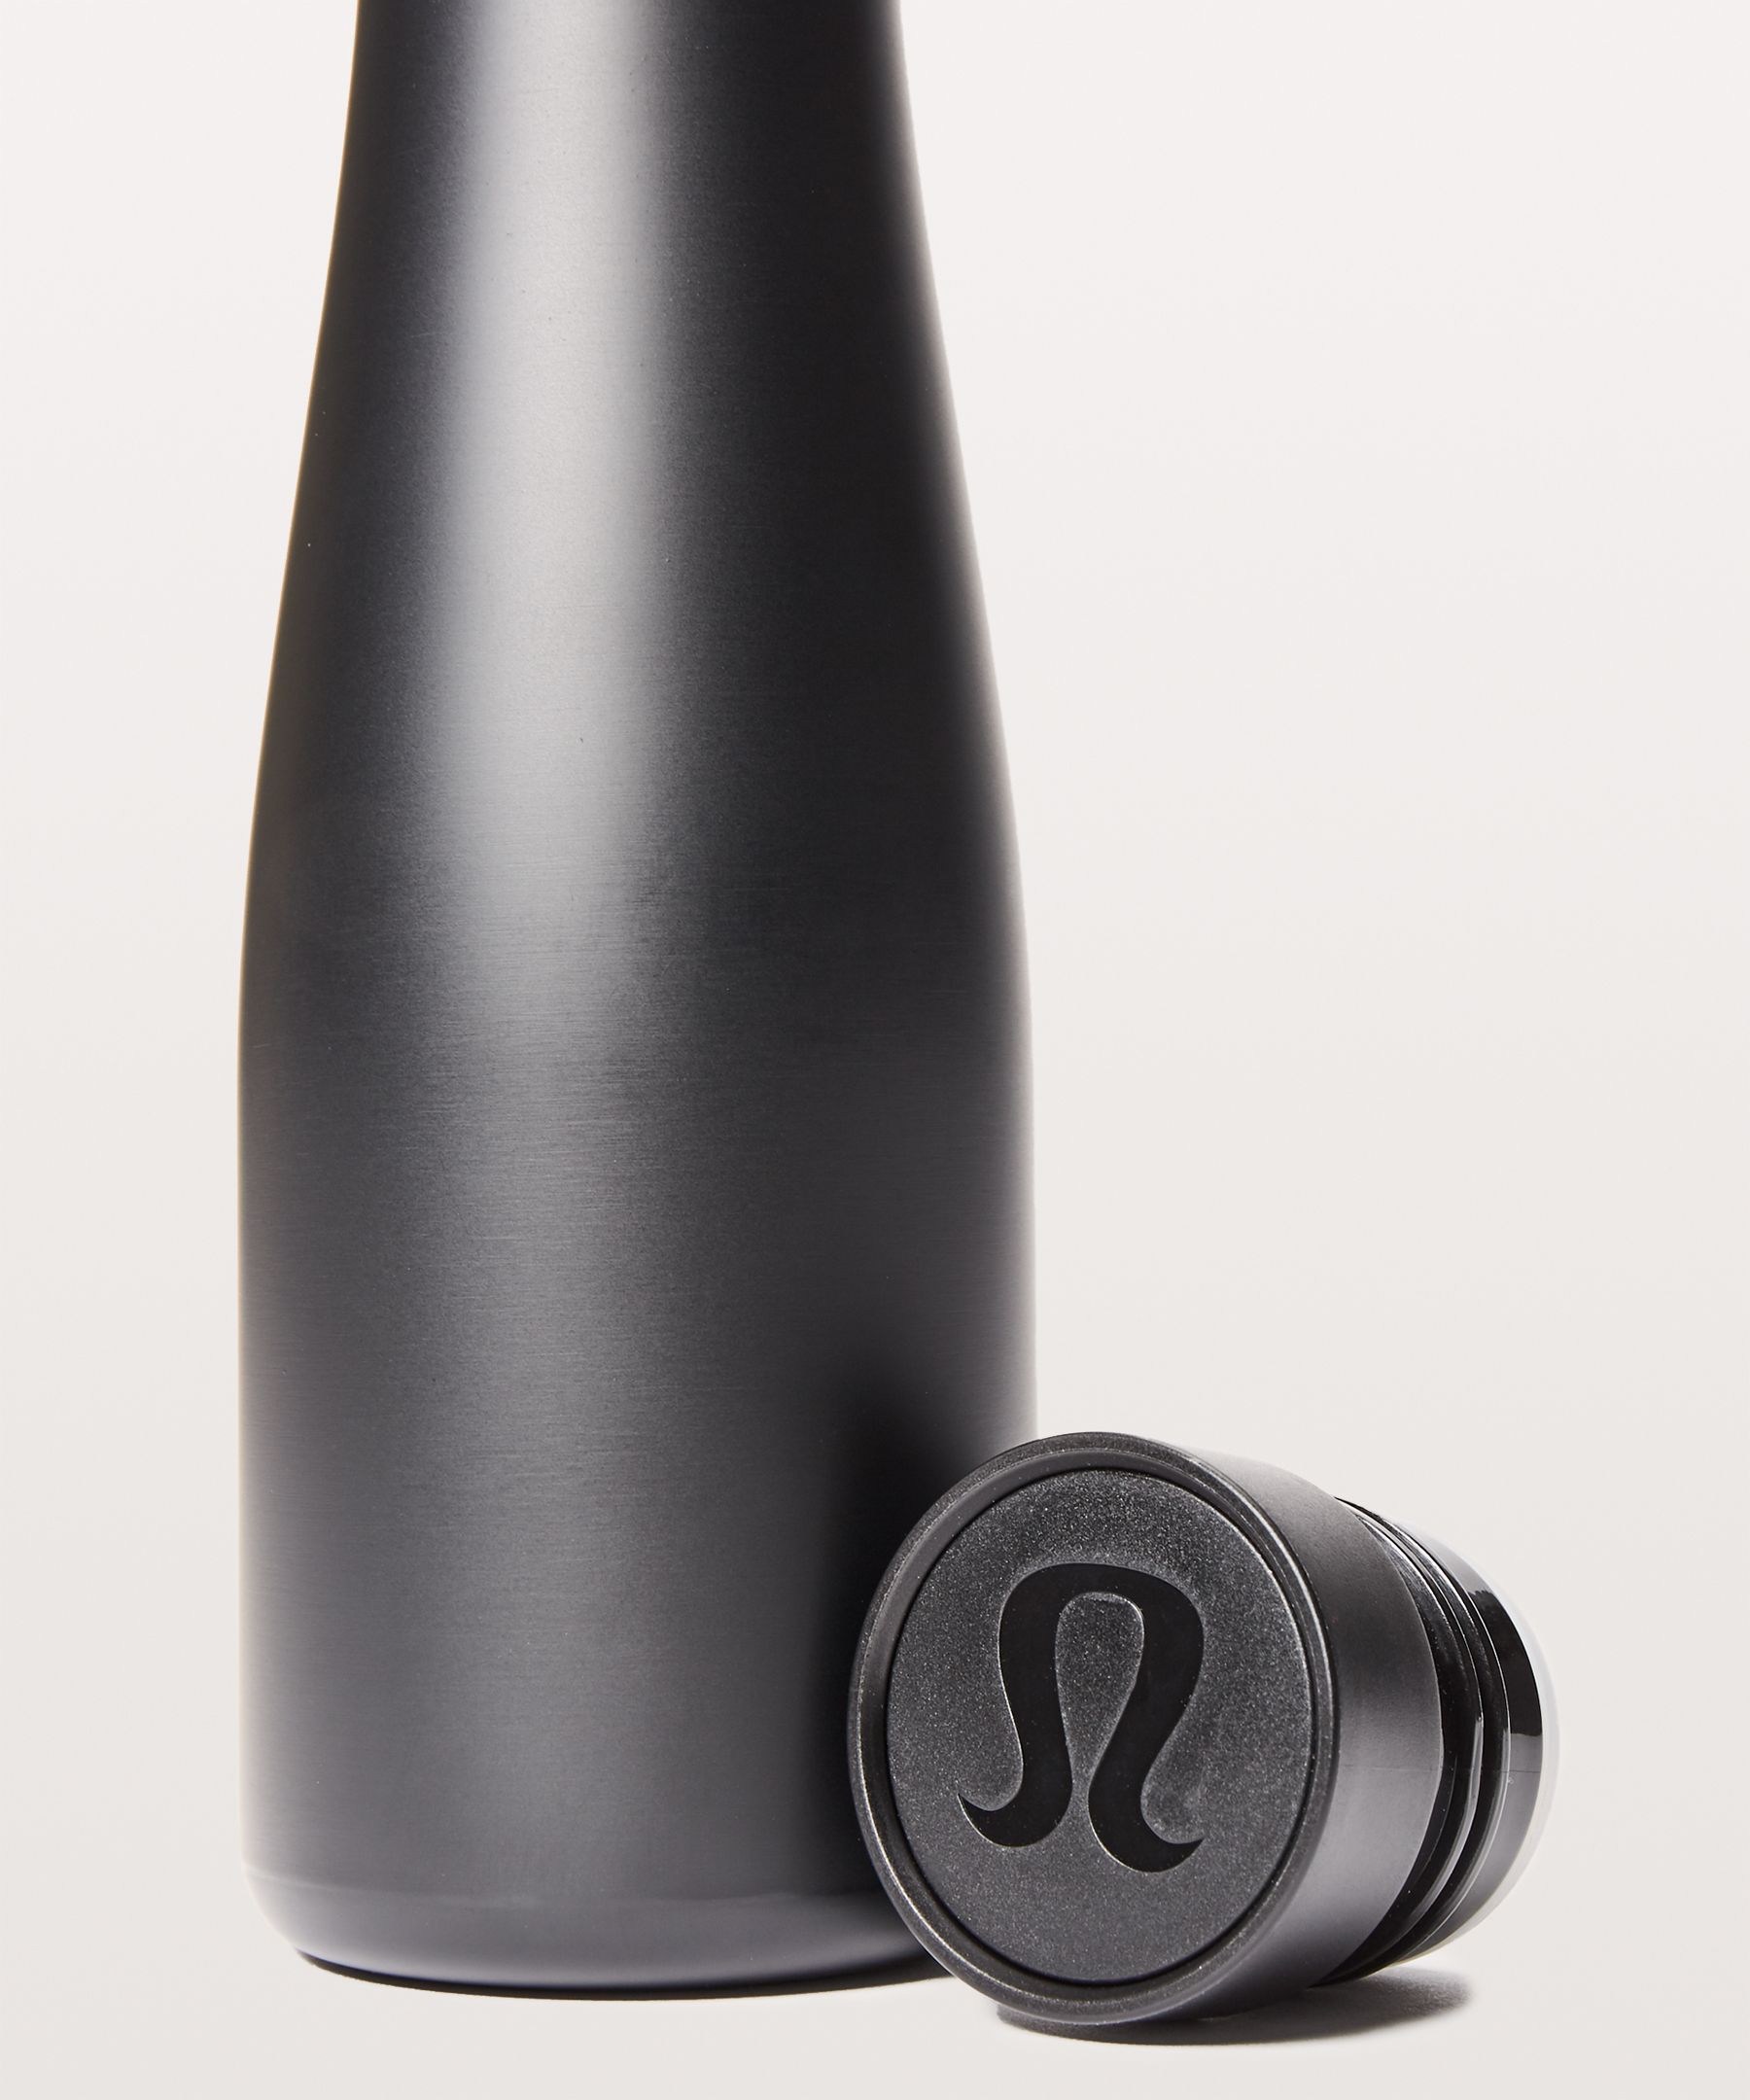 I never thought I would by this bottle. : r/lululemon